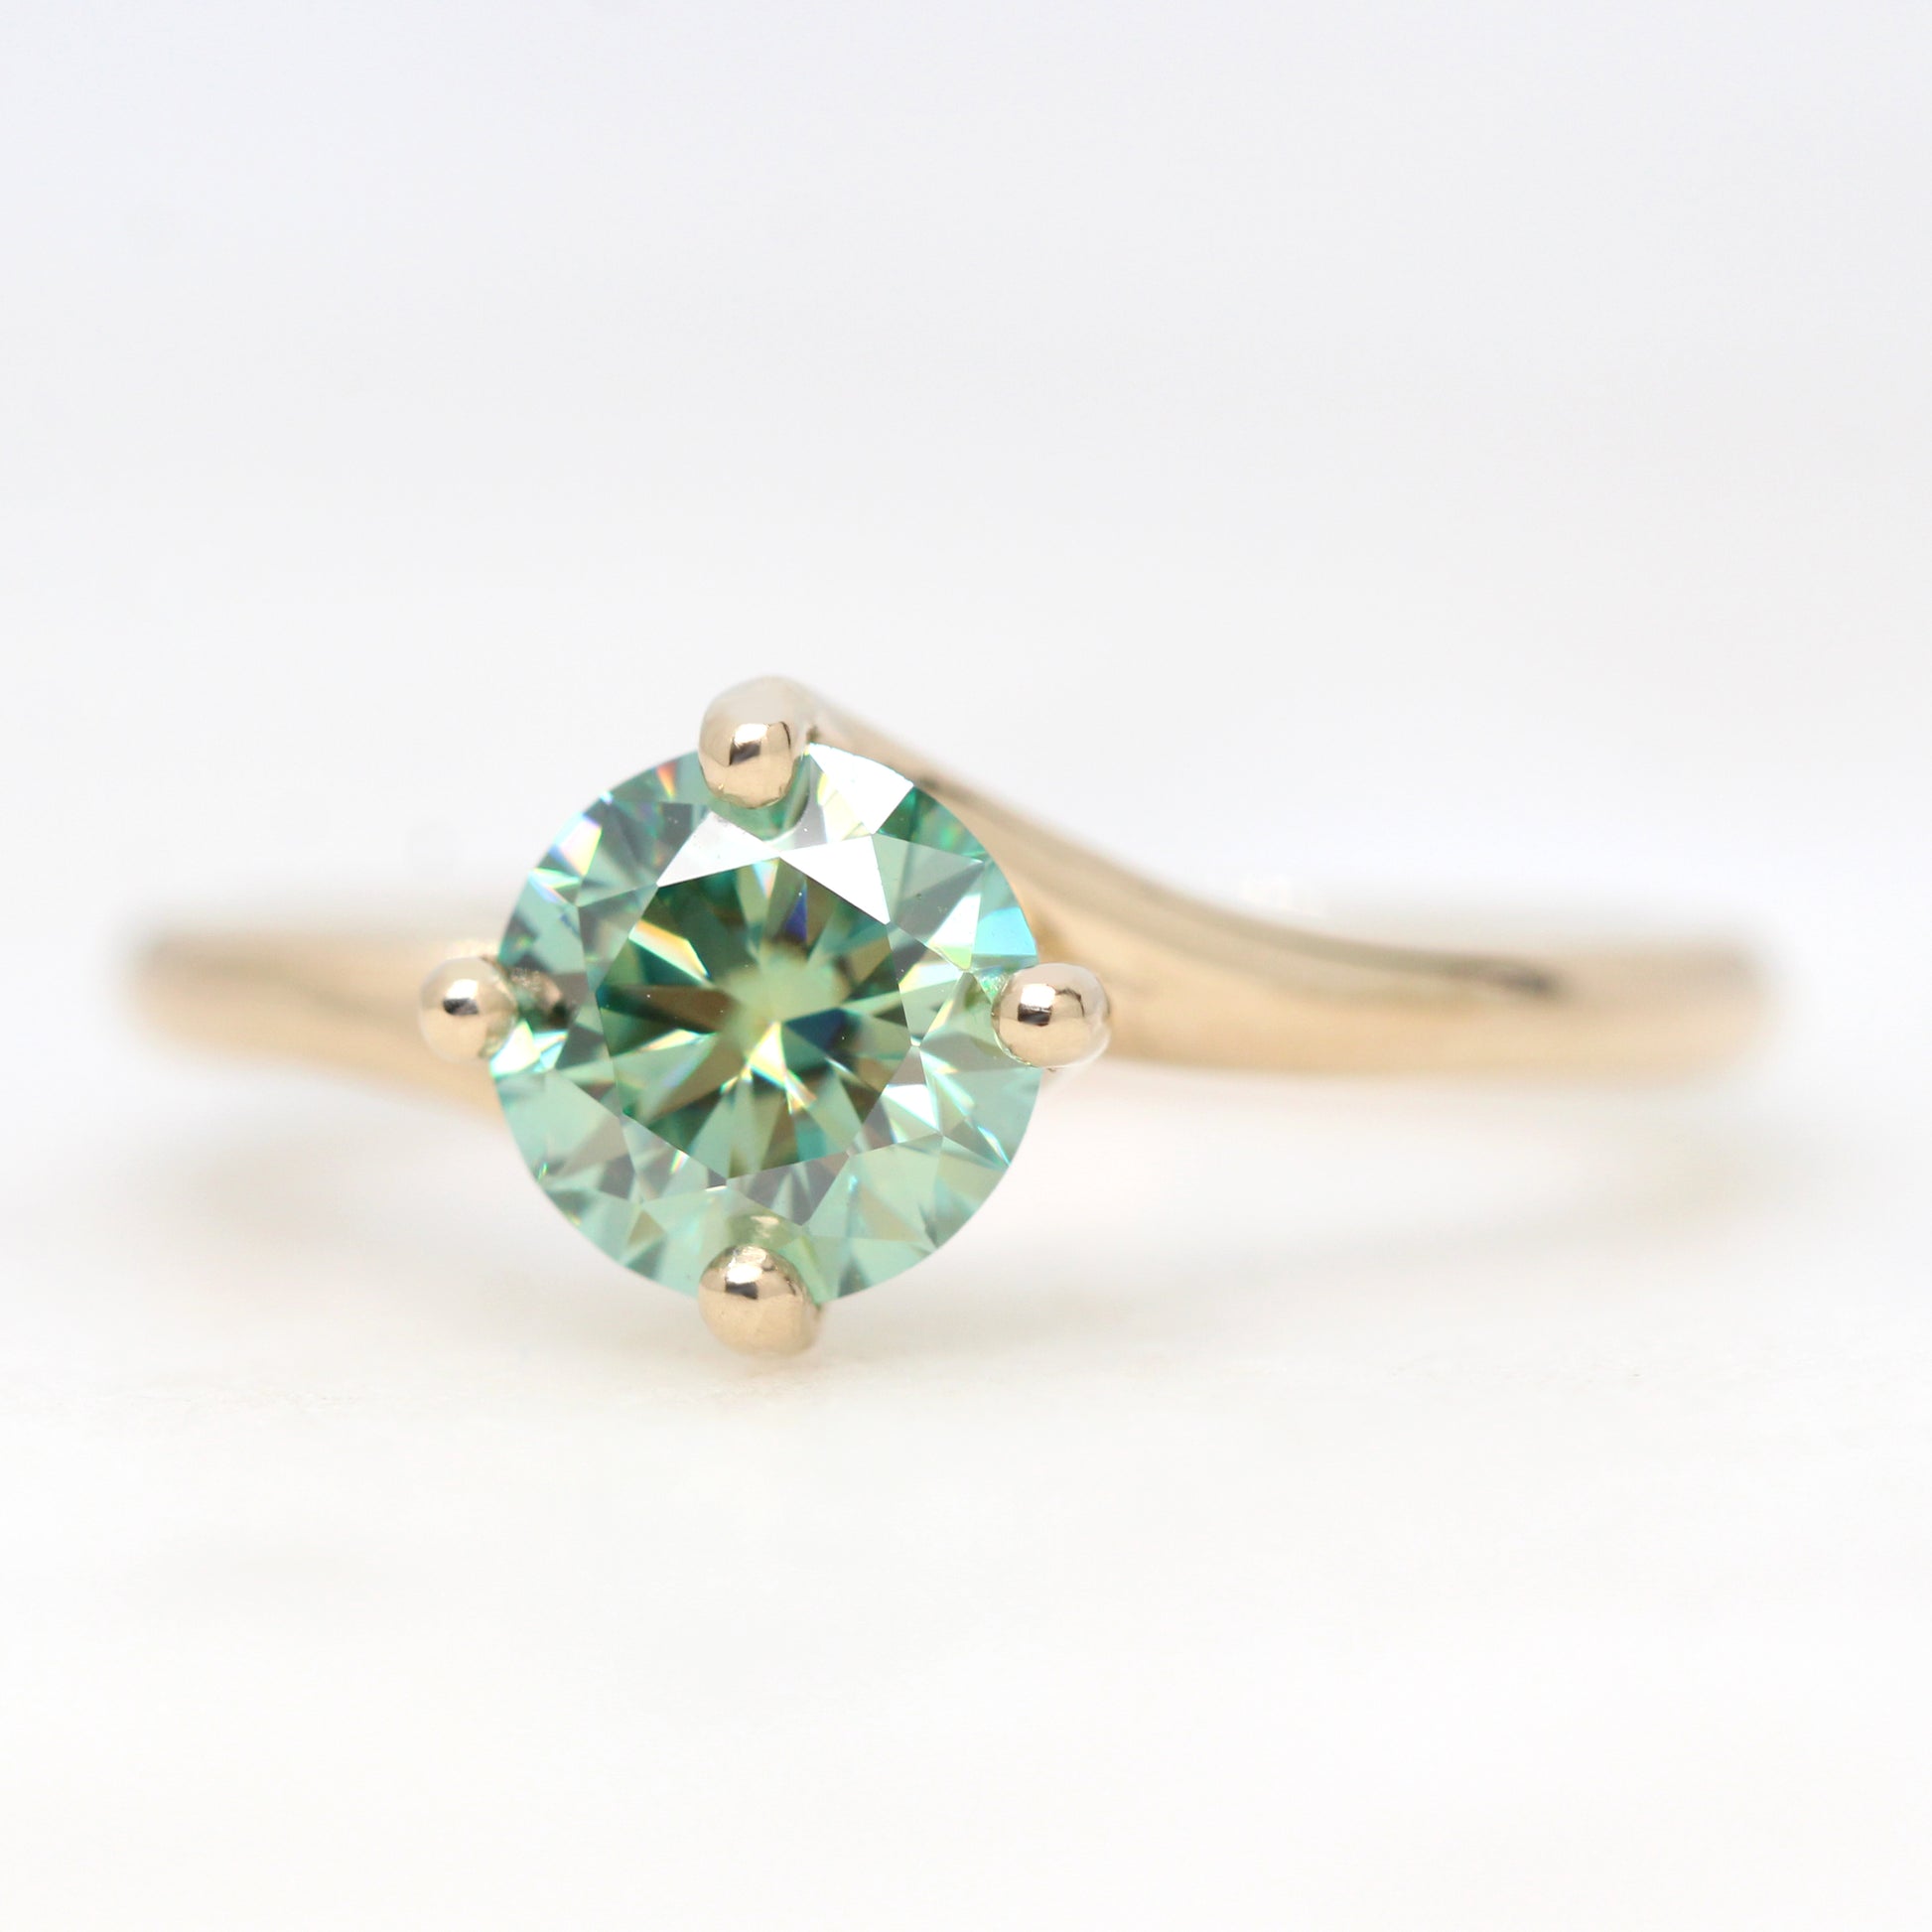 Spira Ring with a 1.00 Carat Round Teal Moissanite in 14k Champagne Gold - Ready to Size and Ship - Midwinter Co. Alternative Bridal Rings and Modern Fine Jewelry